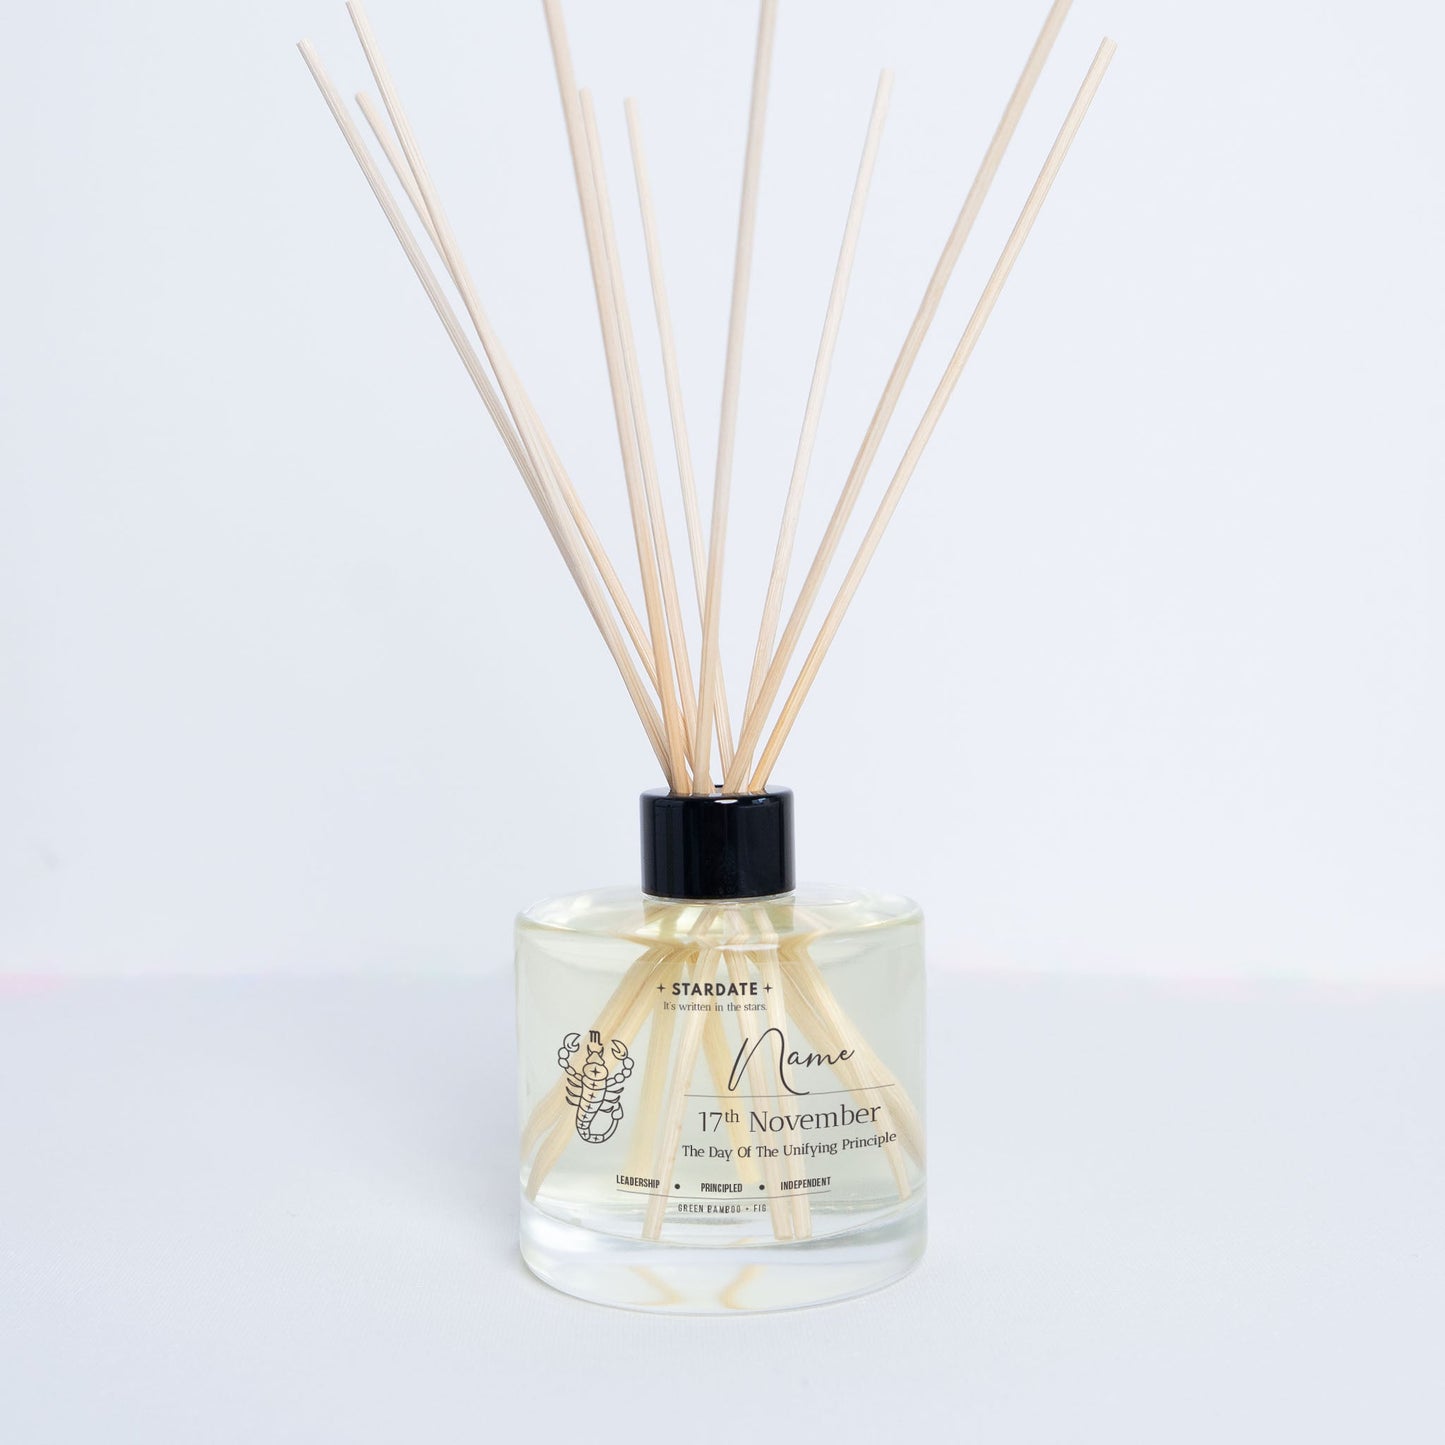 stardate-reed-diffuser-nov-one